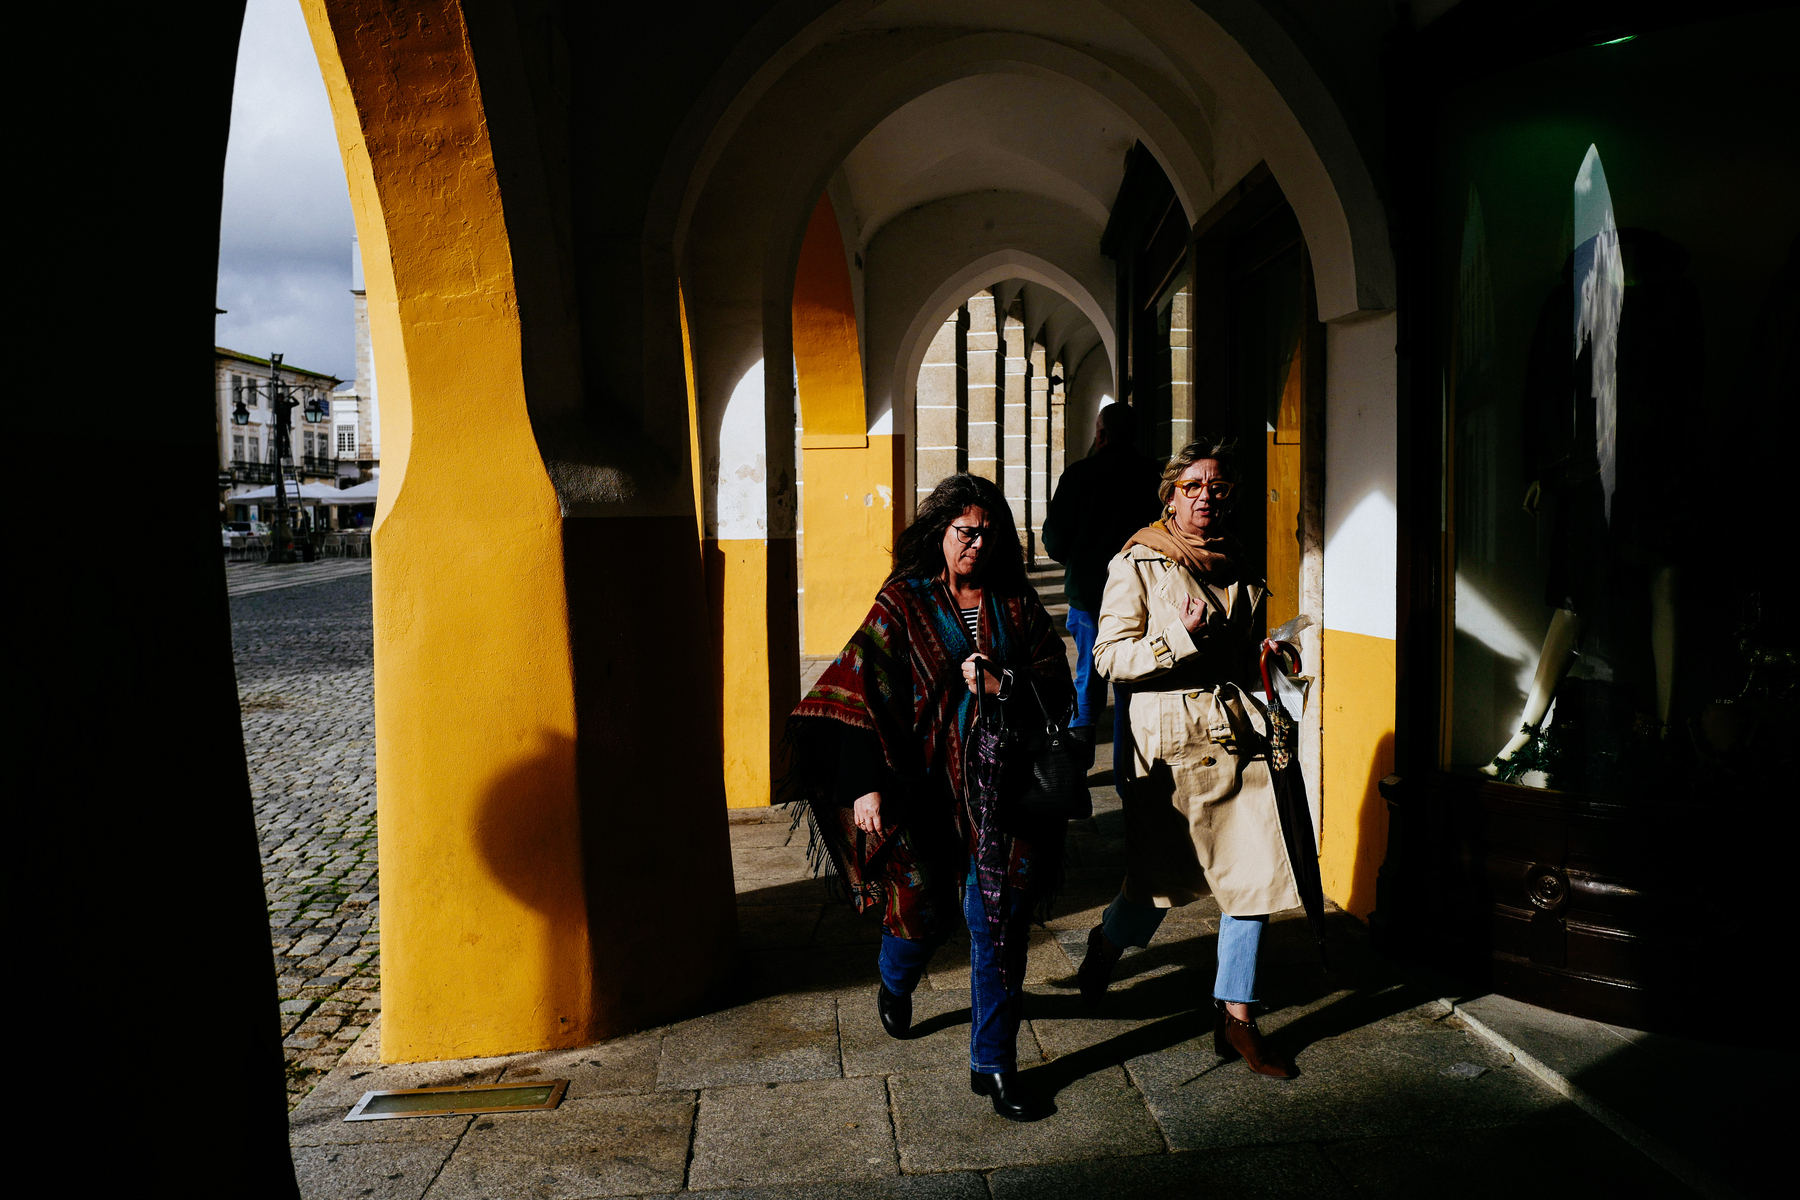 Two women walk towards us, under yellow arches. 